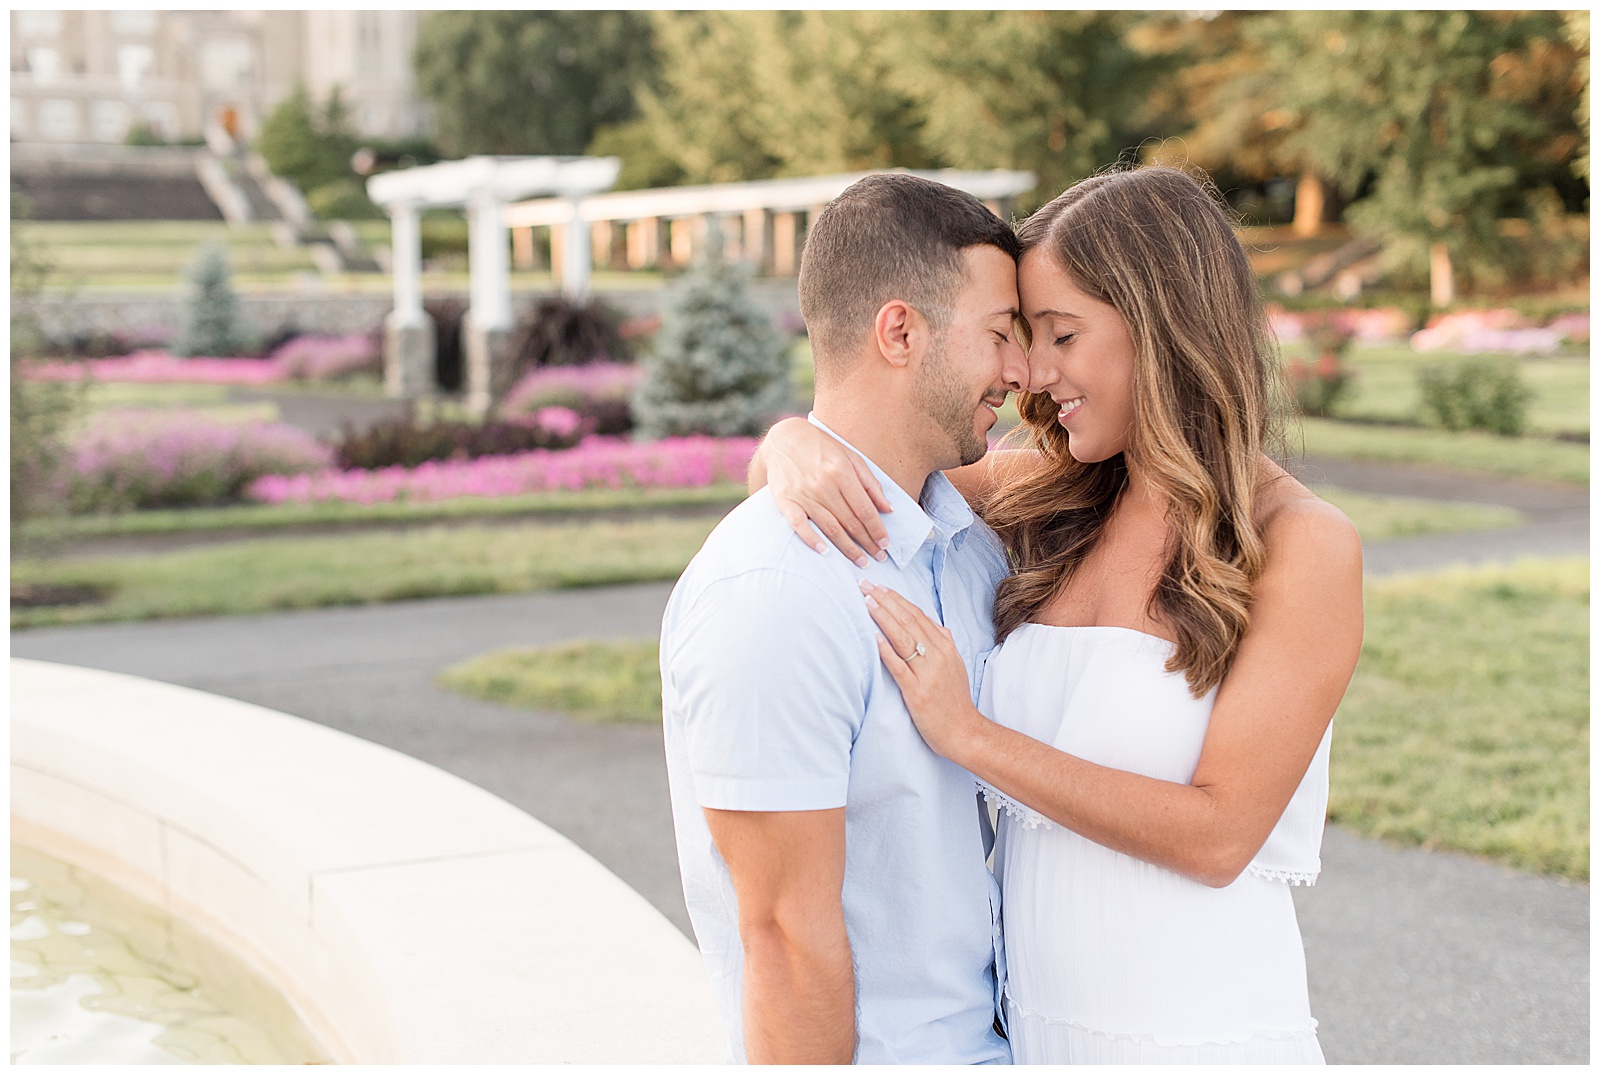 couple nuzzling in close with noses touching at side of fountain